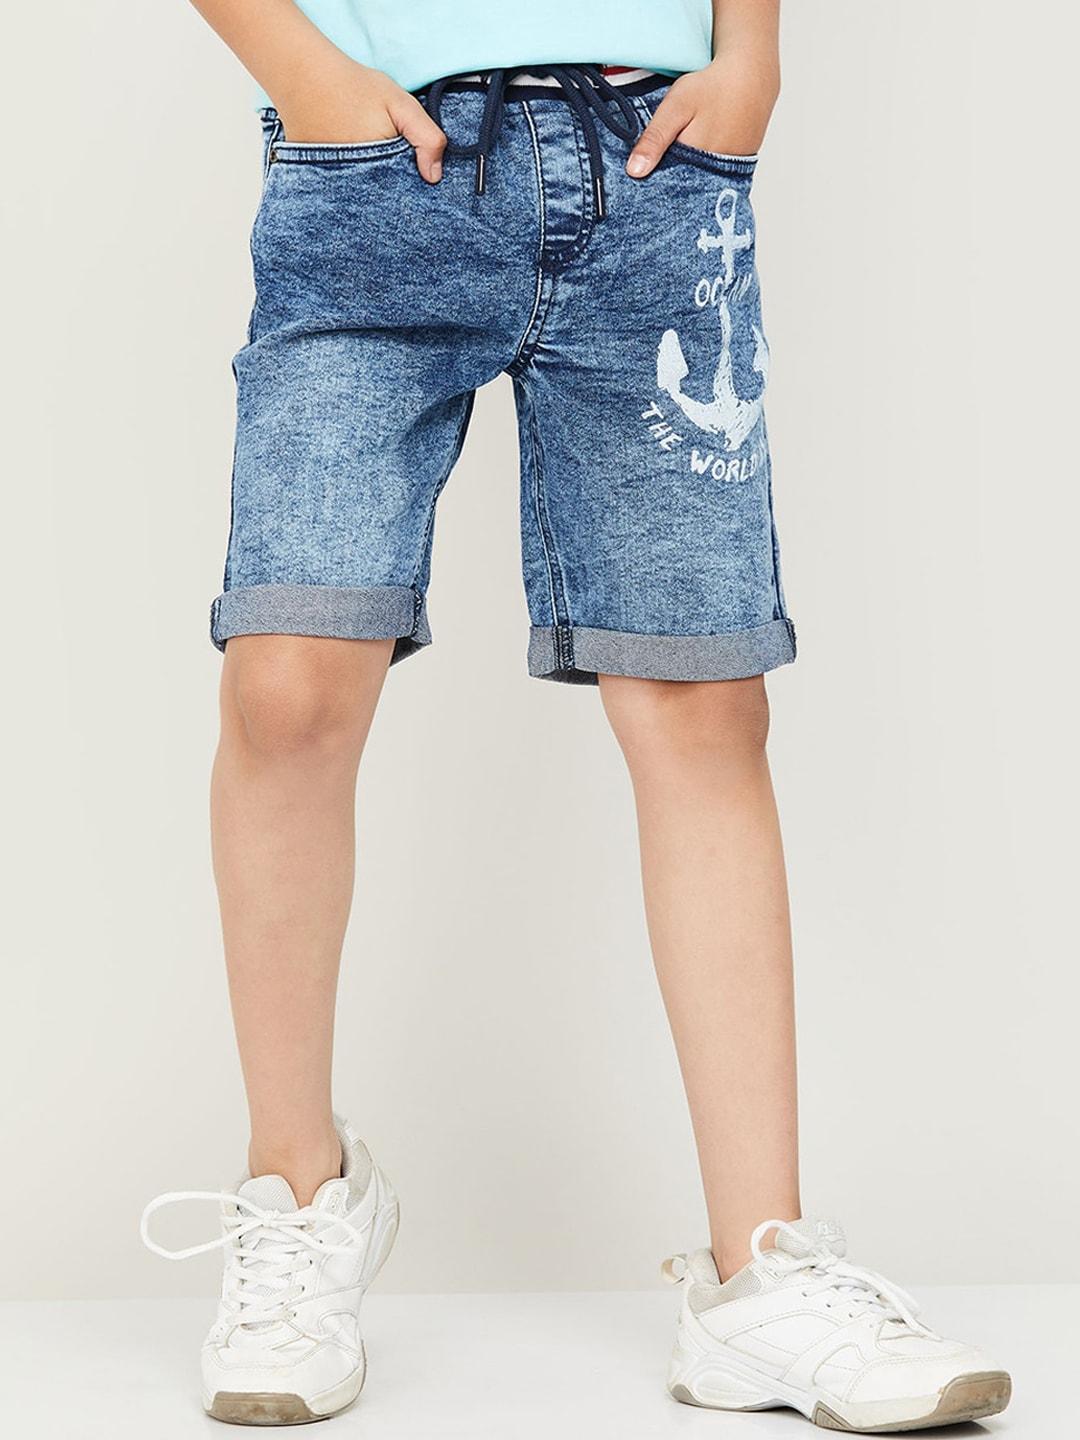 fame-forever-by-lifestyle-boys-printed-cotton-washed-denim-shorts